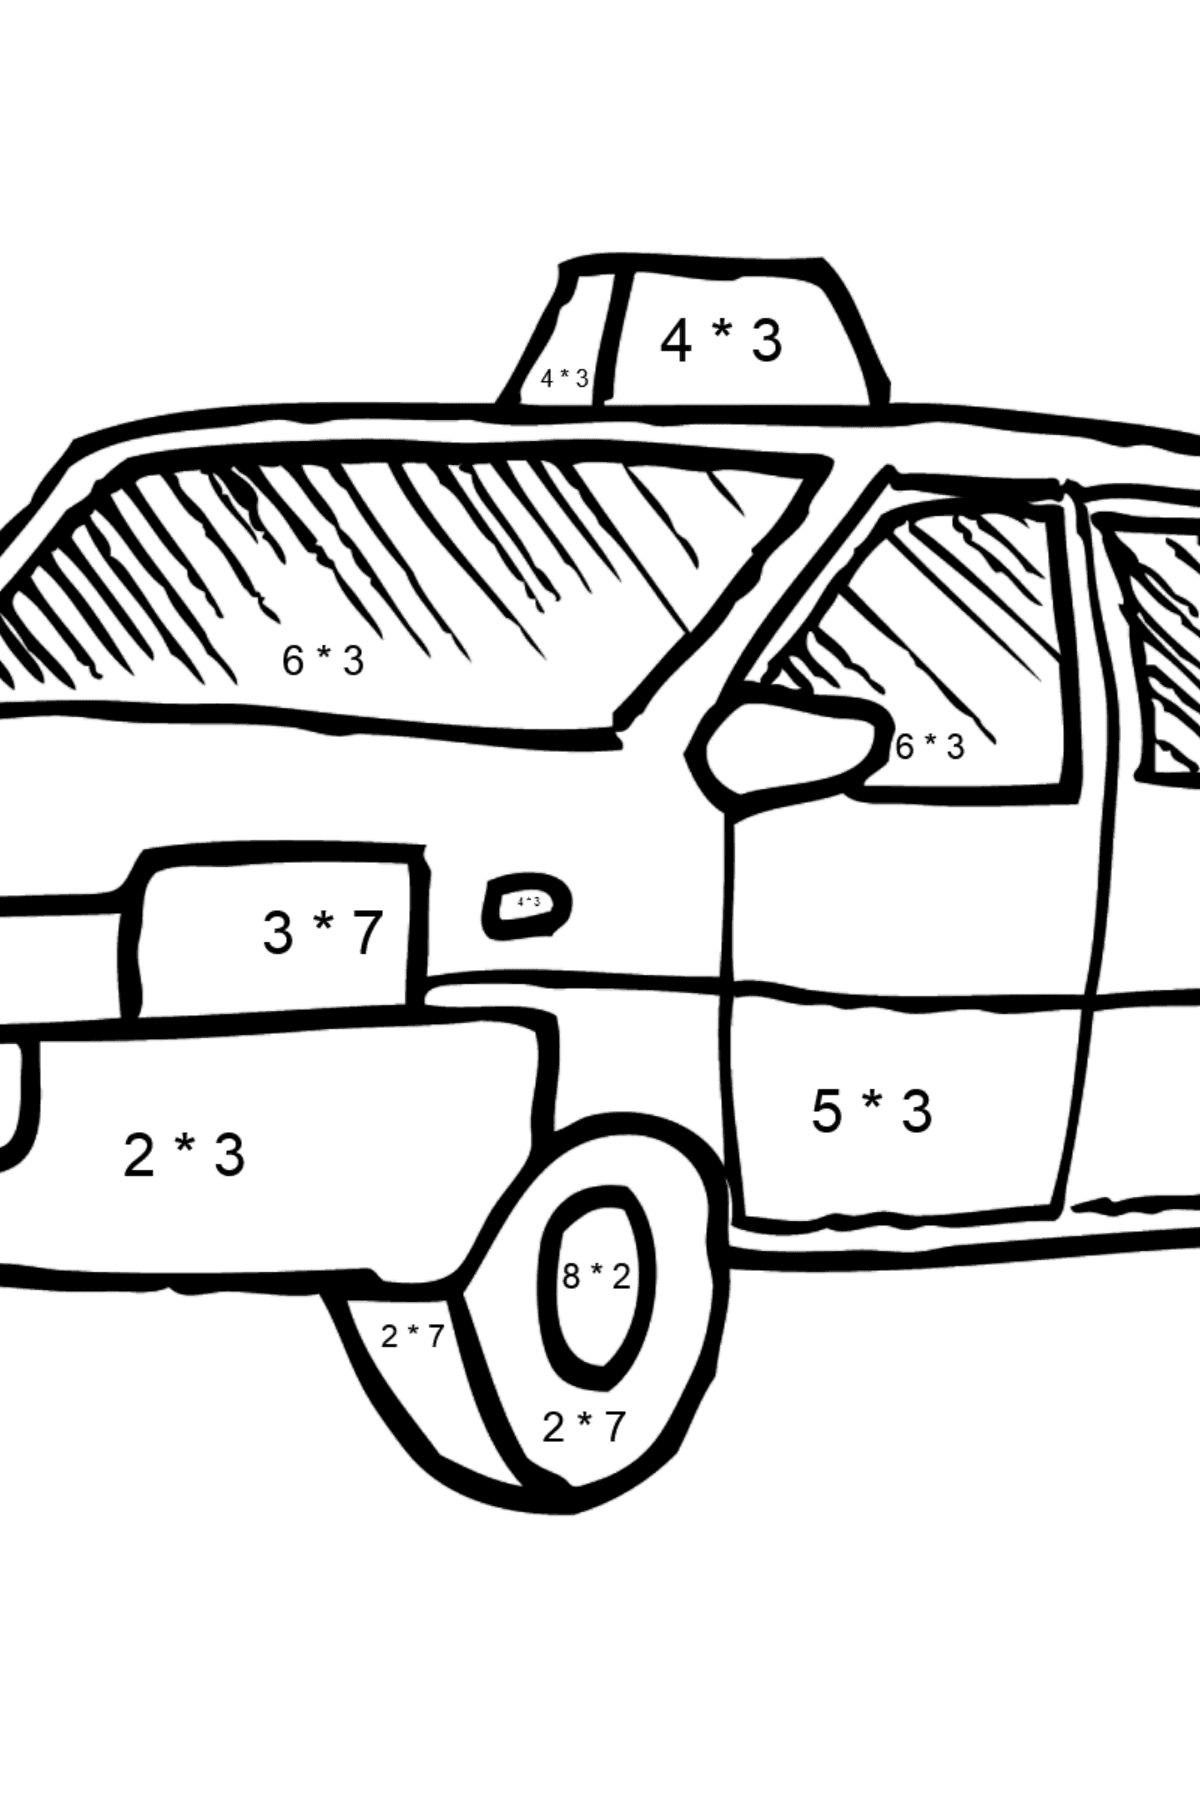 Coloring Page - A Yellow Taxi - Math Coloring - Multiplication for Kids